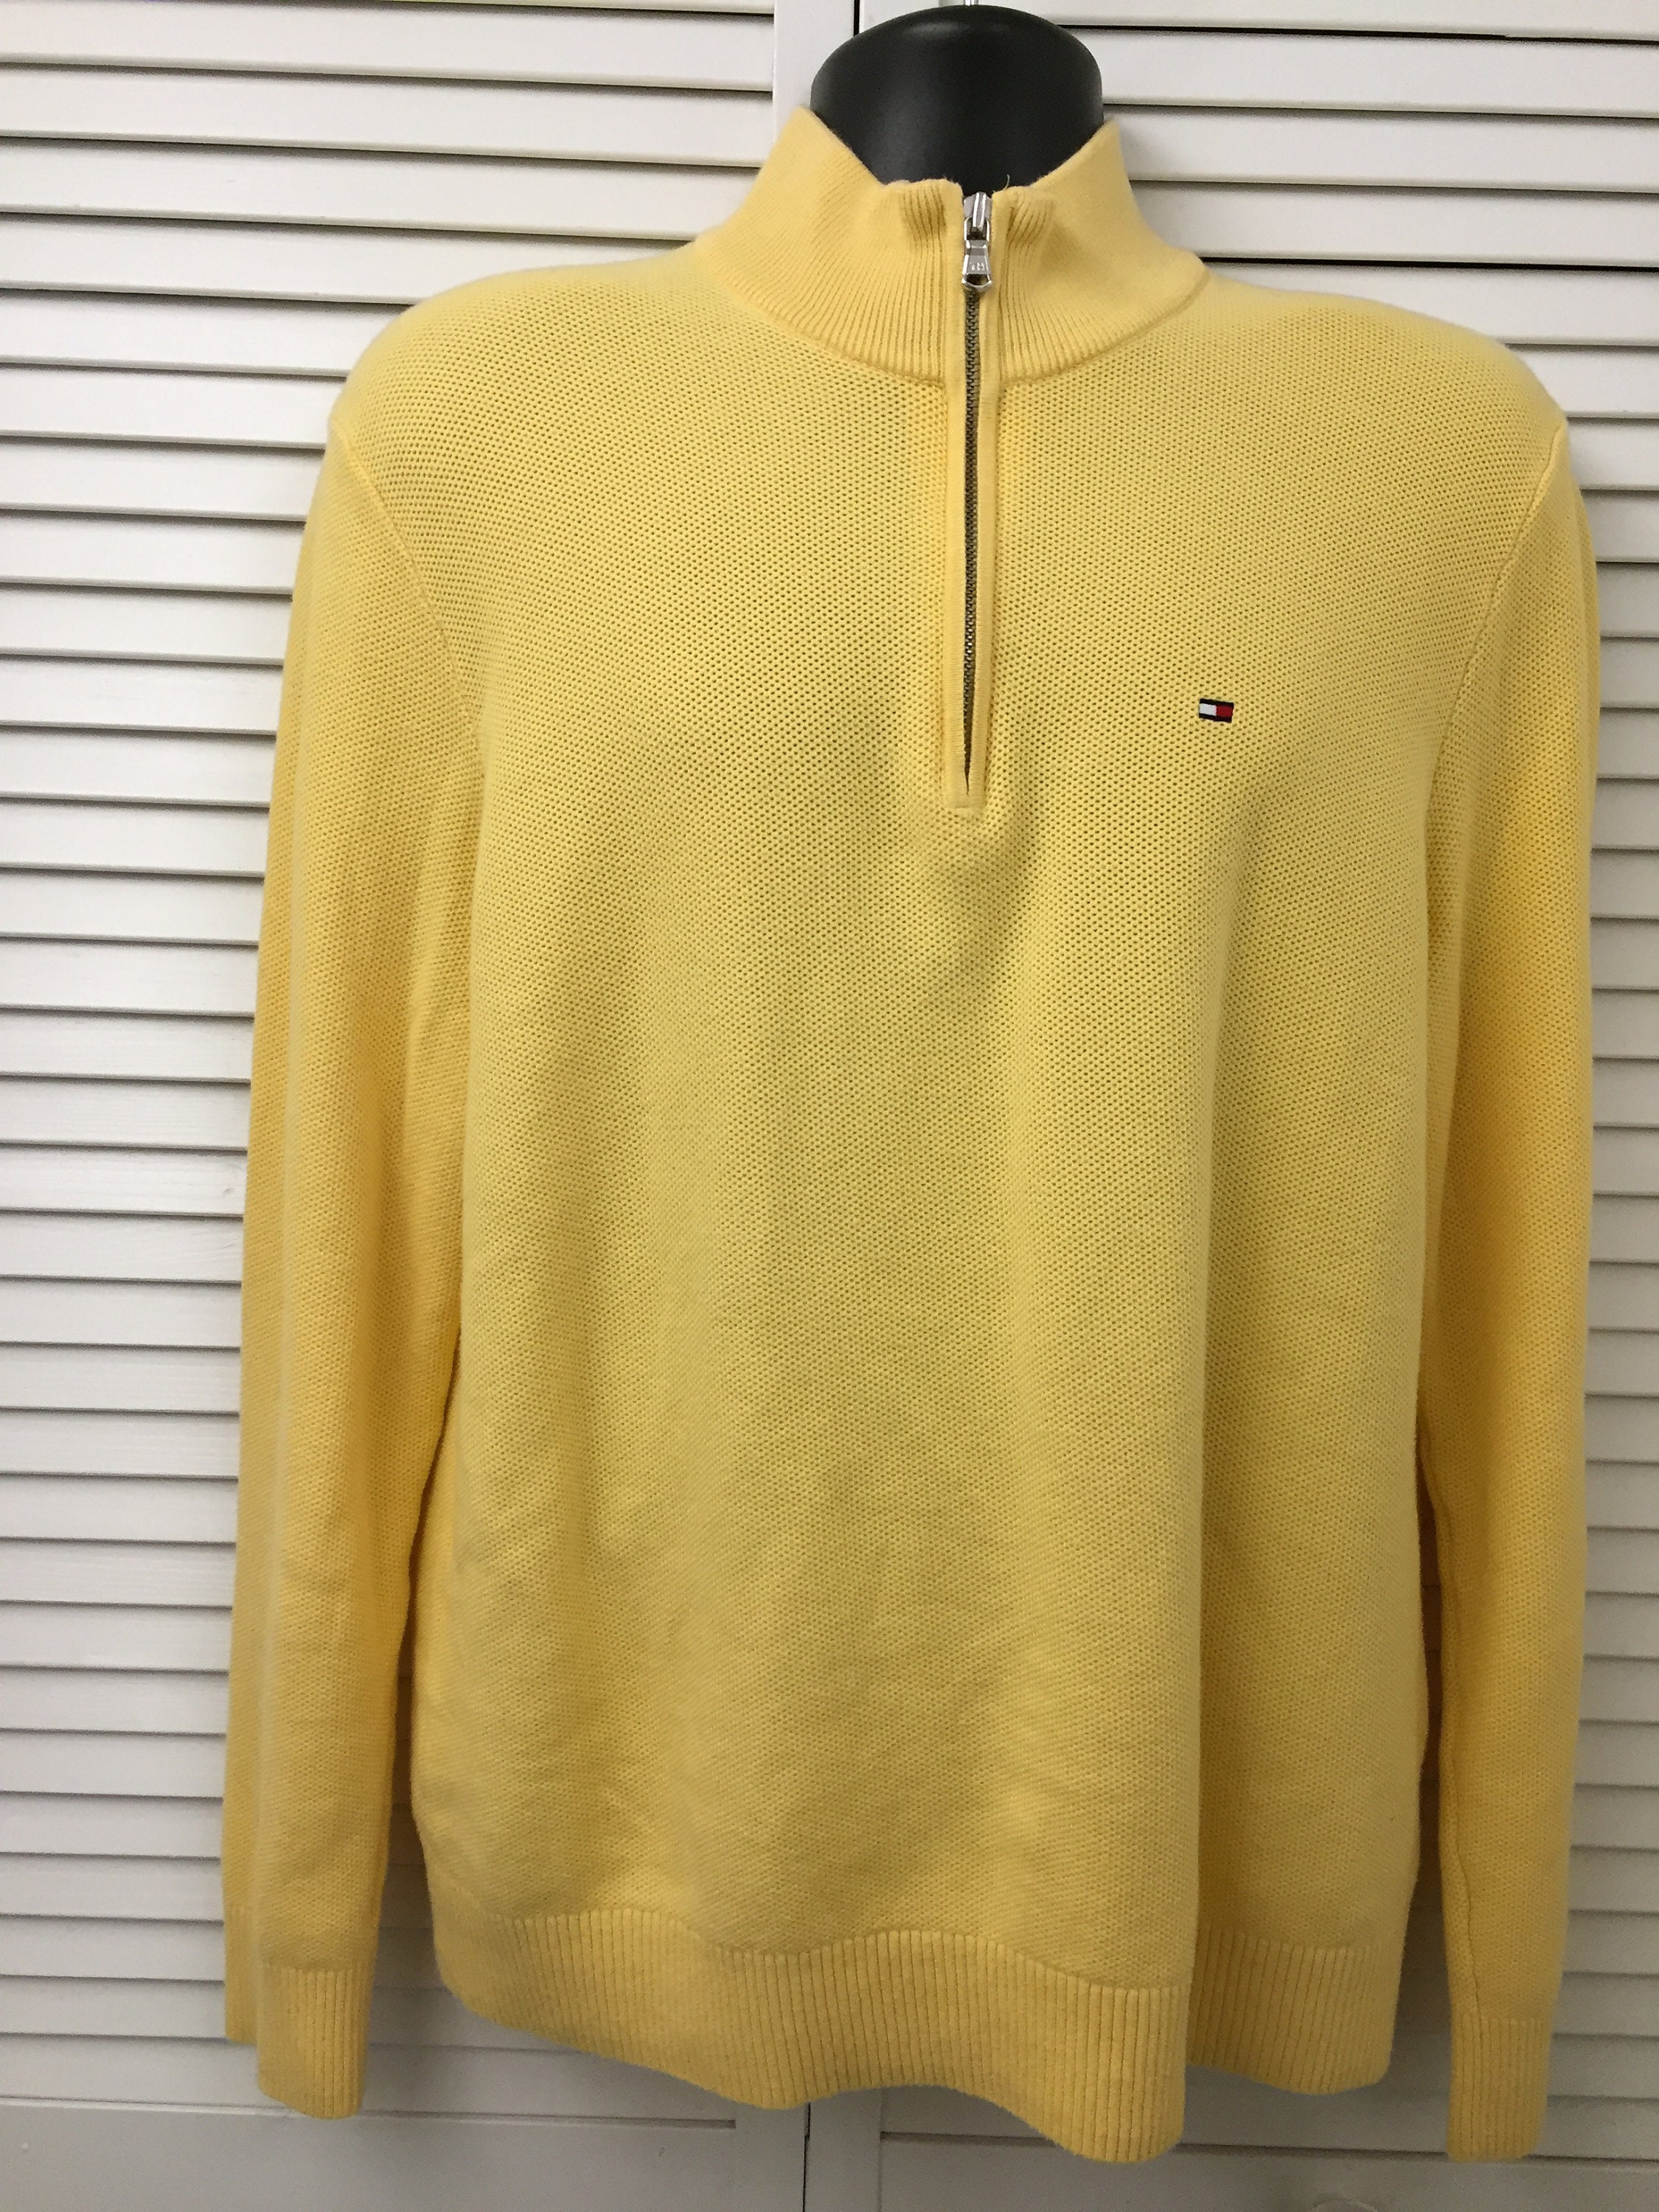 Golden Yellow Tommy Hilfiger 100% Cotton Zip Neck Long Sleeved - Etsy